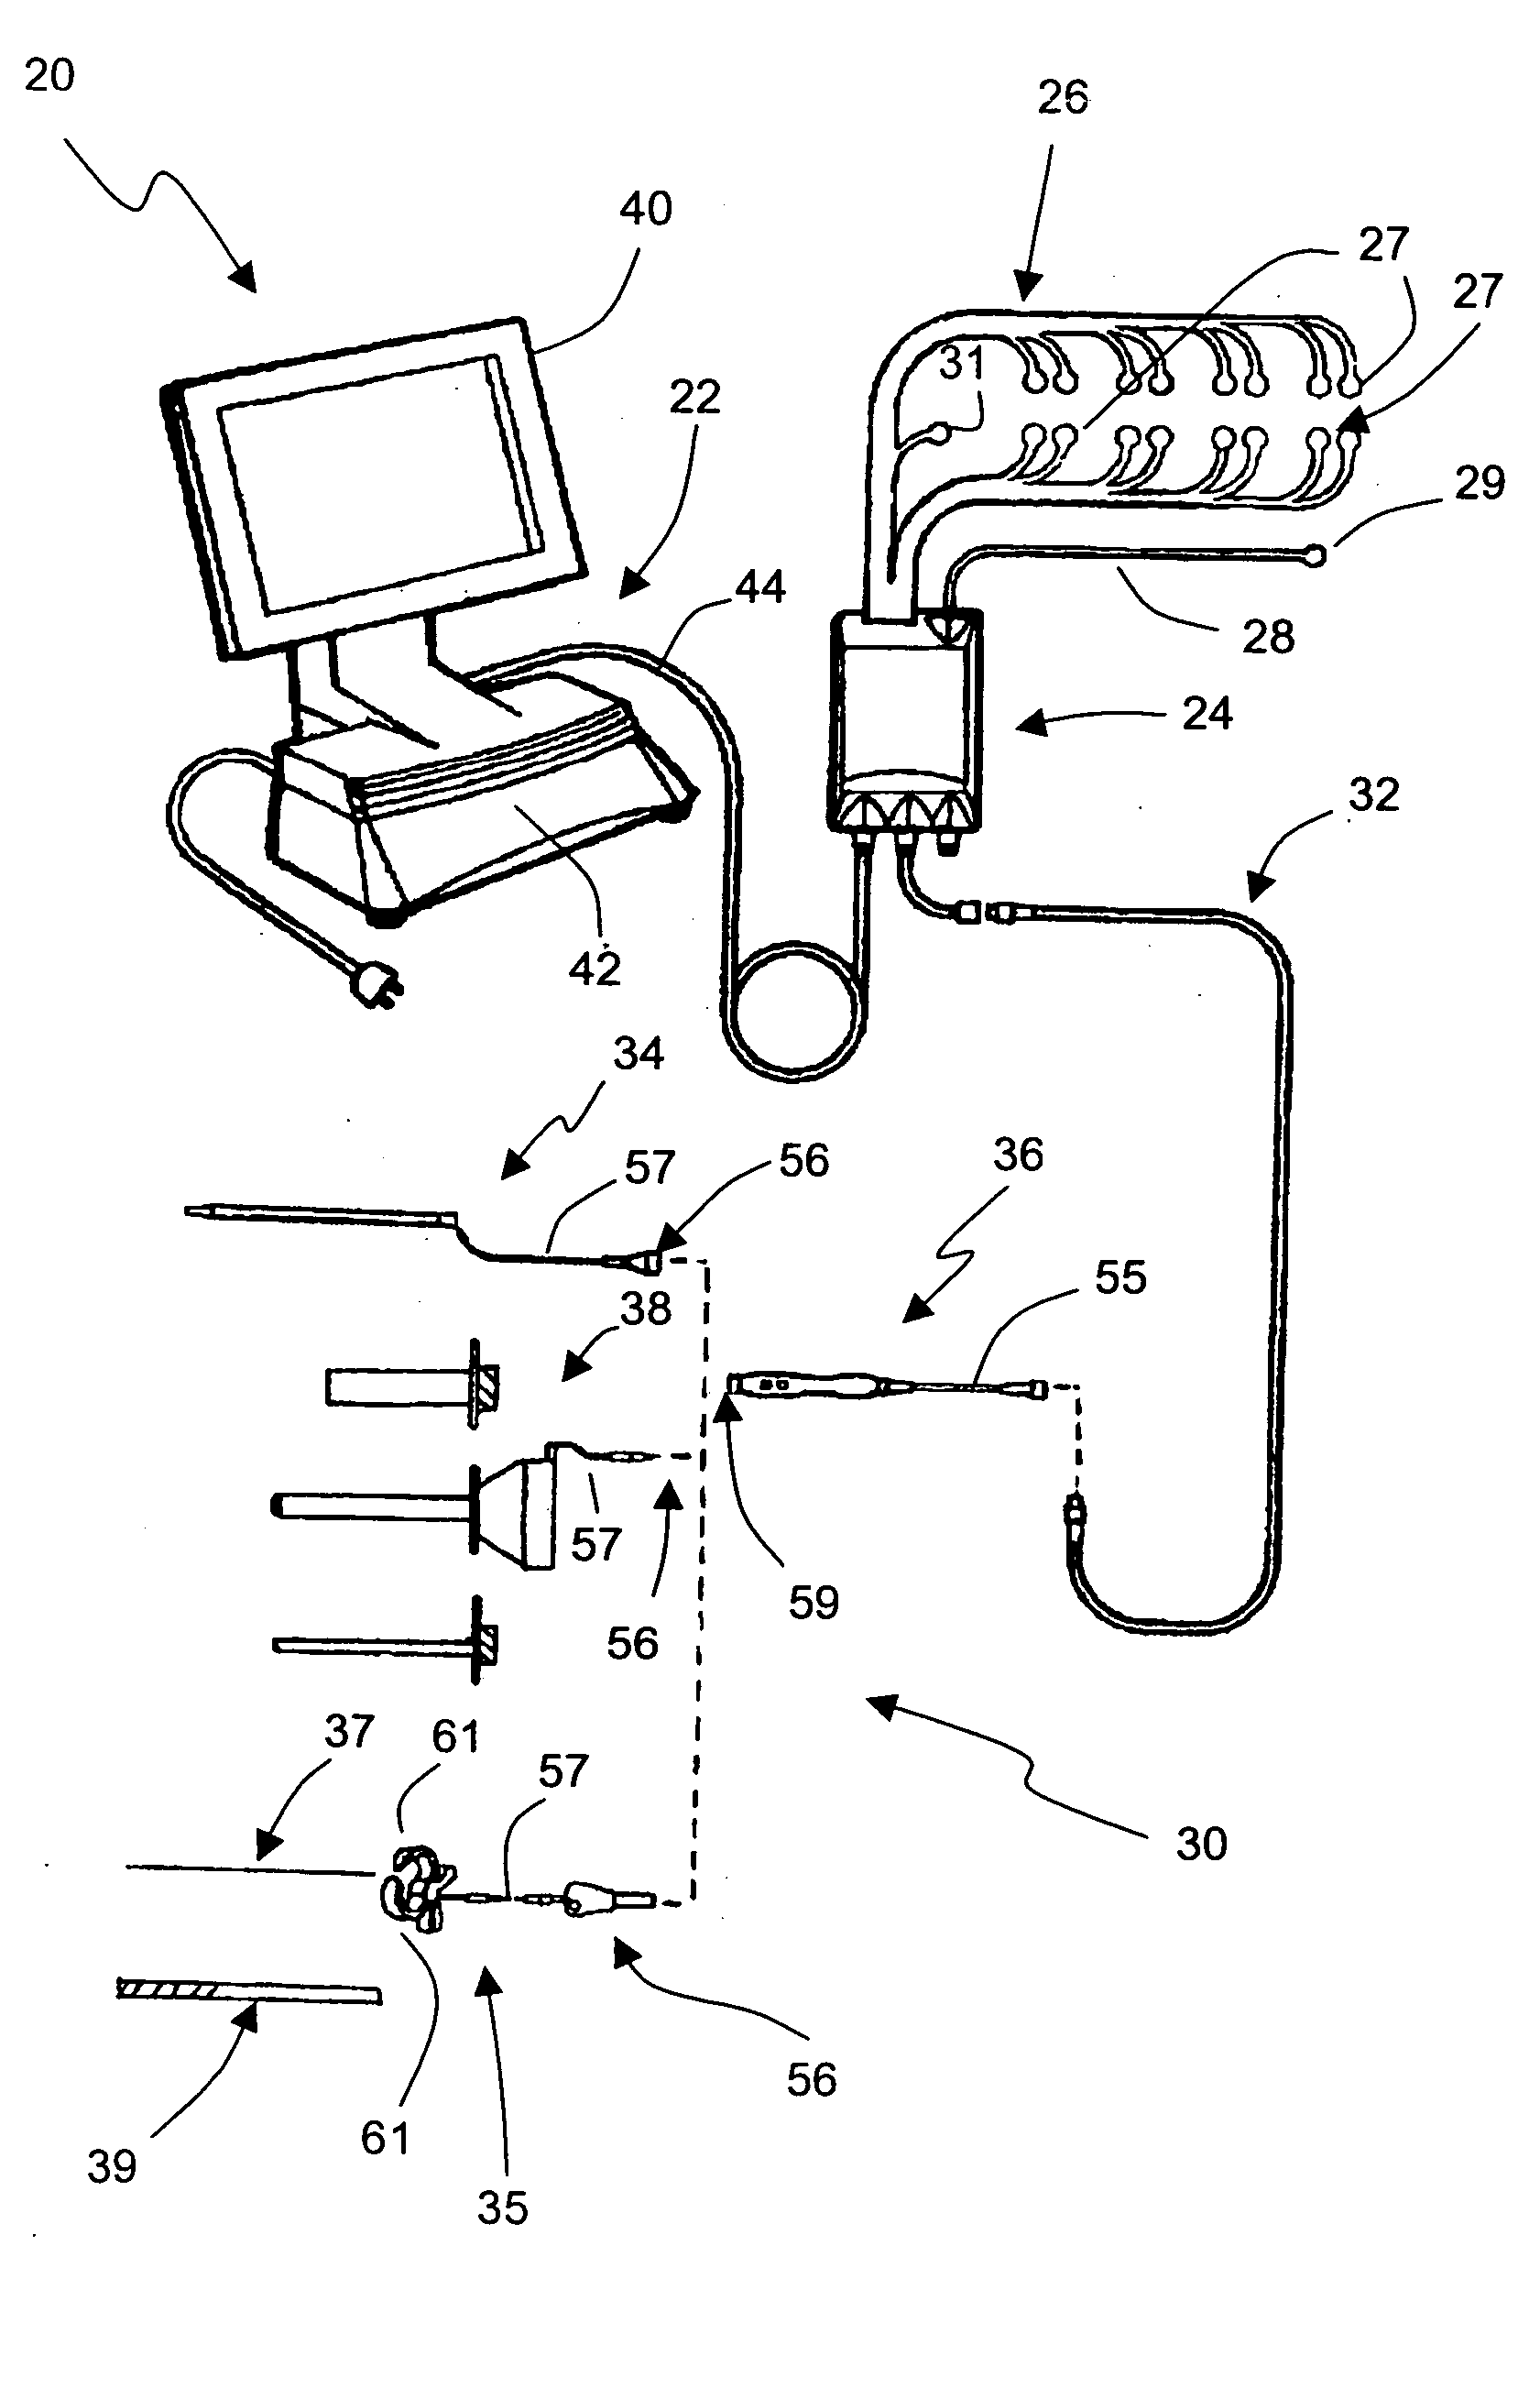 System and methods for performing dynamic pedicle integrity assessments